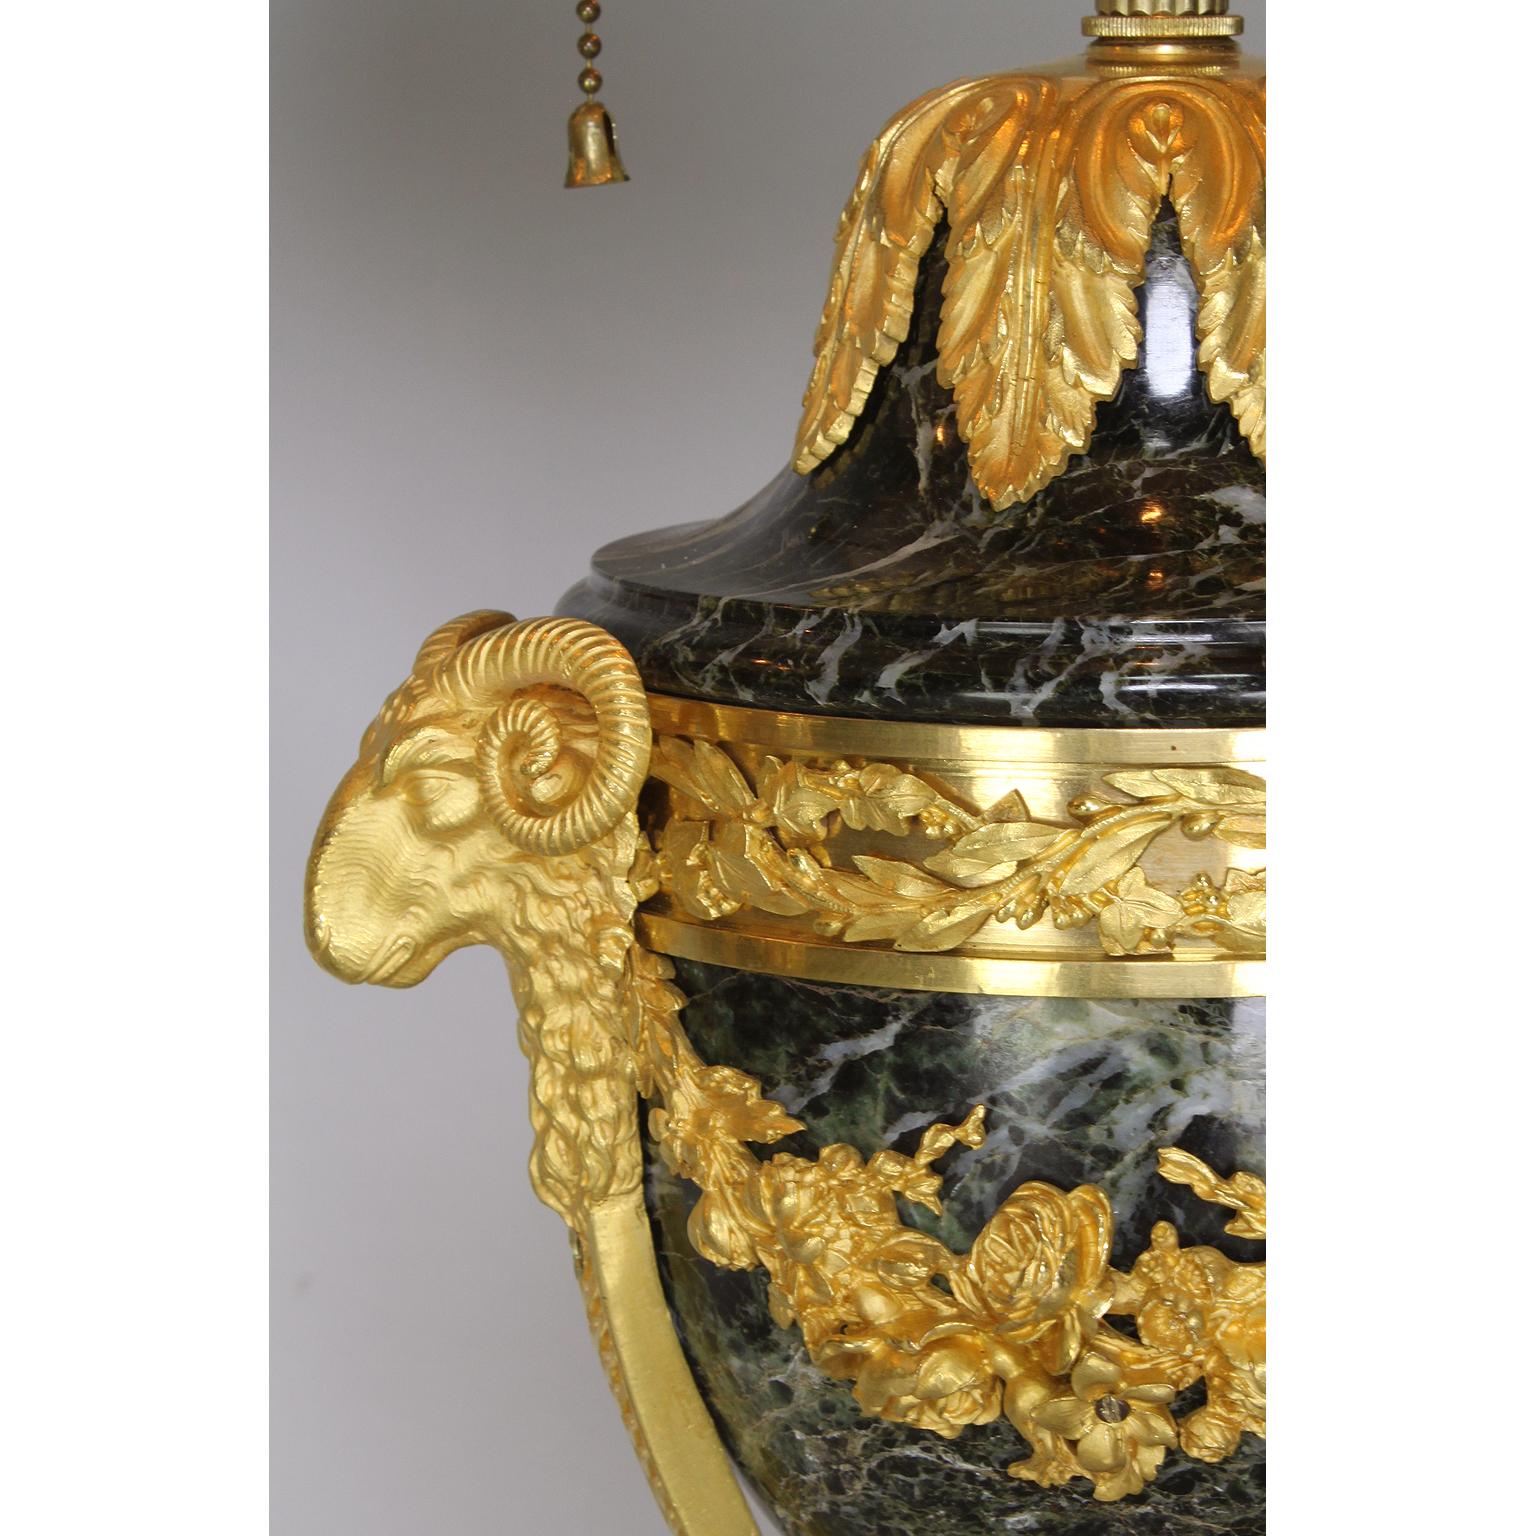 Early 20th Century Pair of French 19th-20th Century Gilt-Bronze ‘Ormolu’ Mounted Urn Figural Lamps